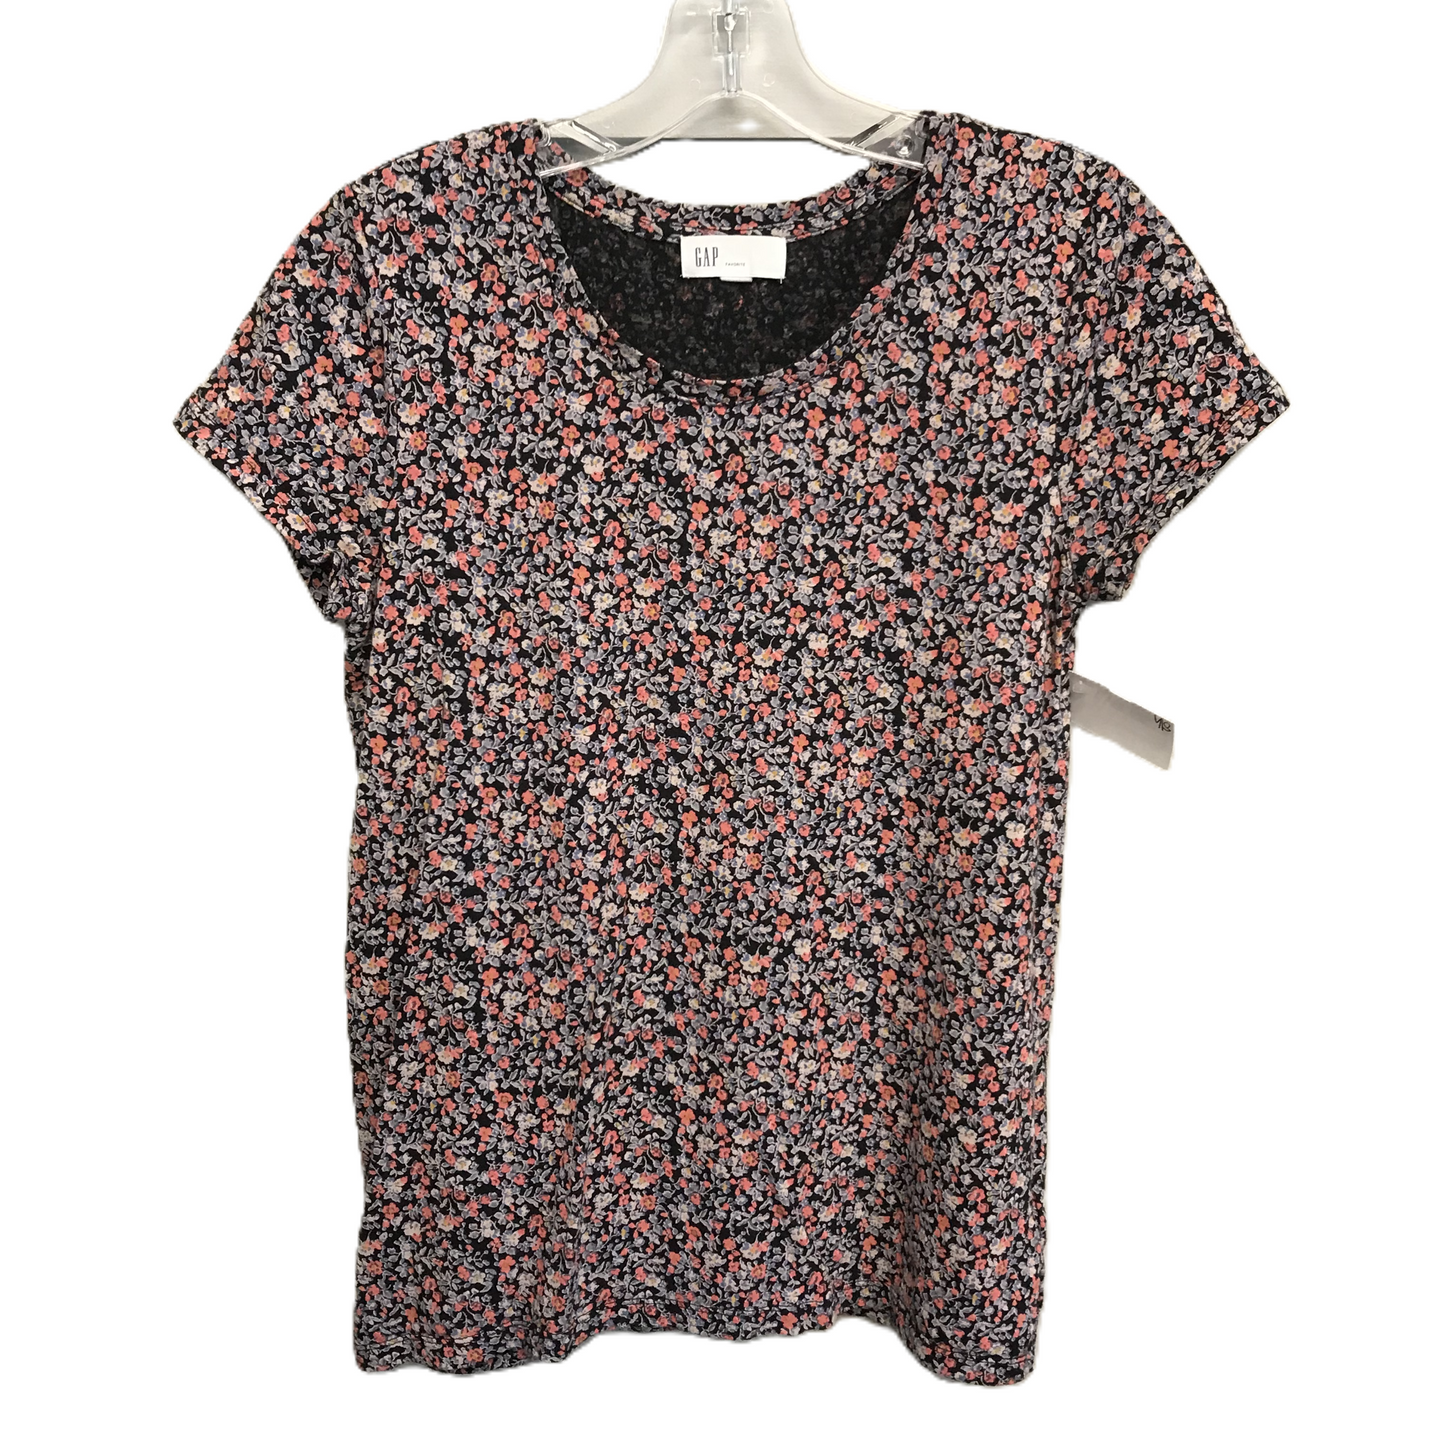 Floral Print Top Short Sleeve Basic By Gap, Size: S